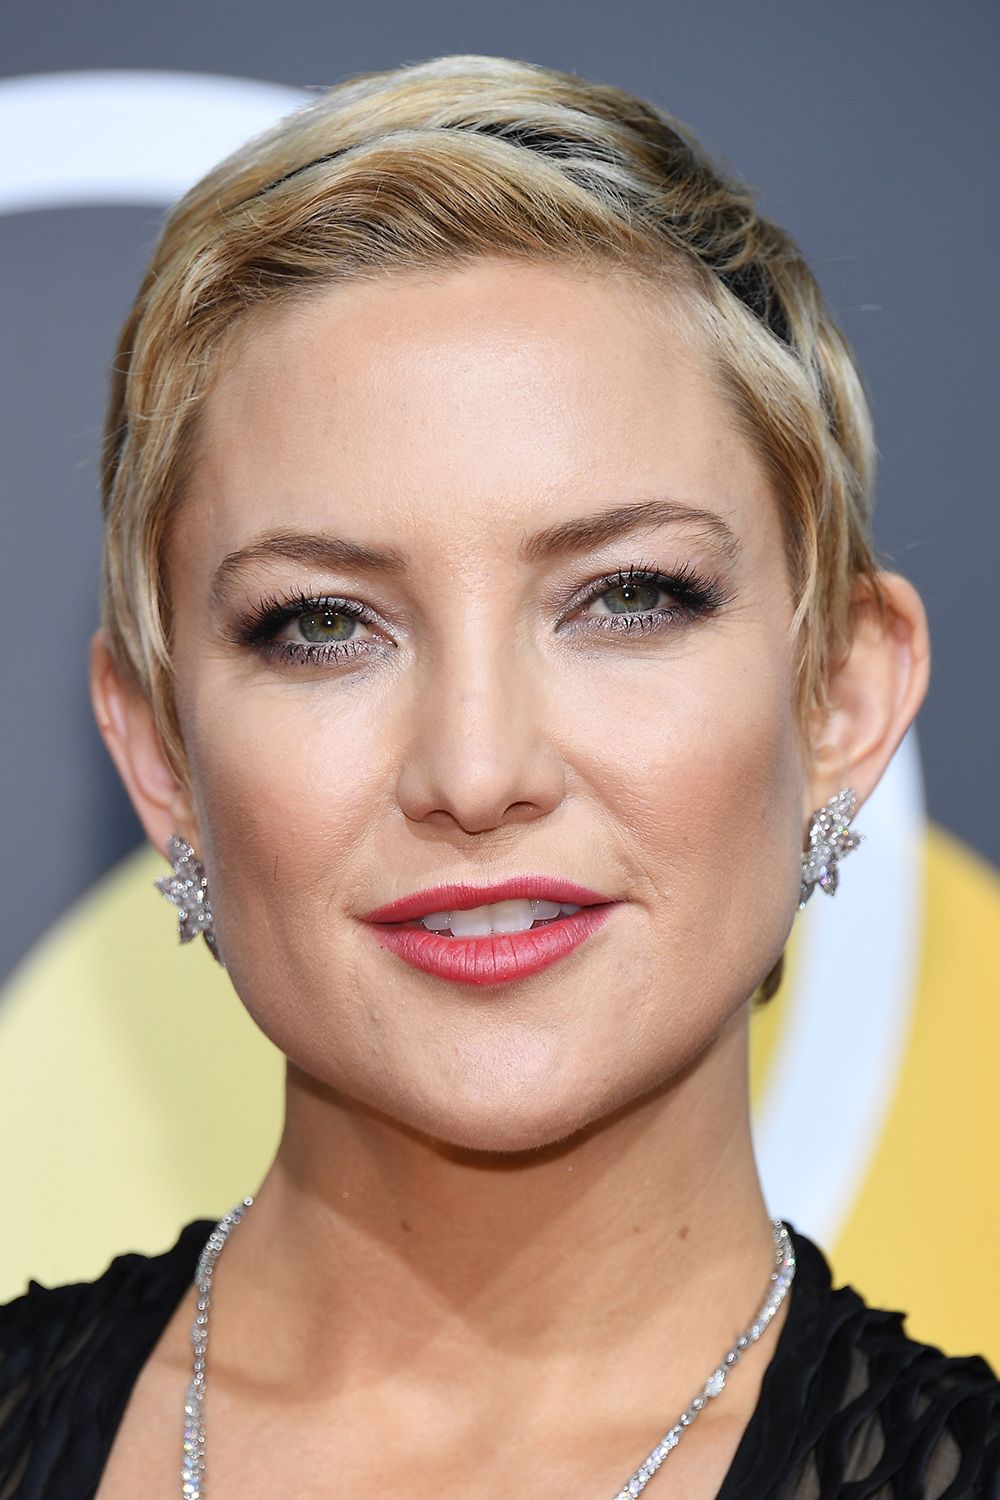 Kate Hudson: “The shaved head awesome”